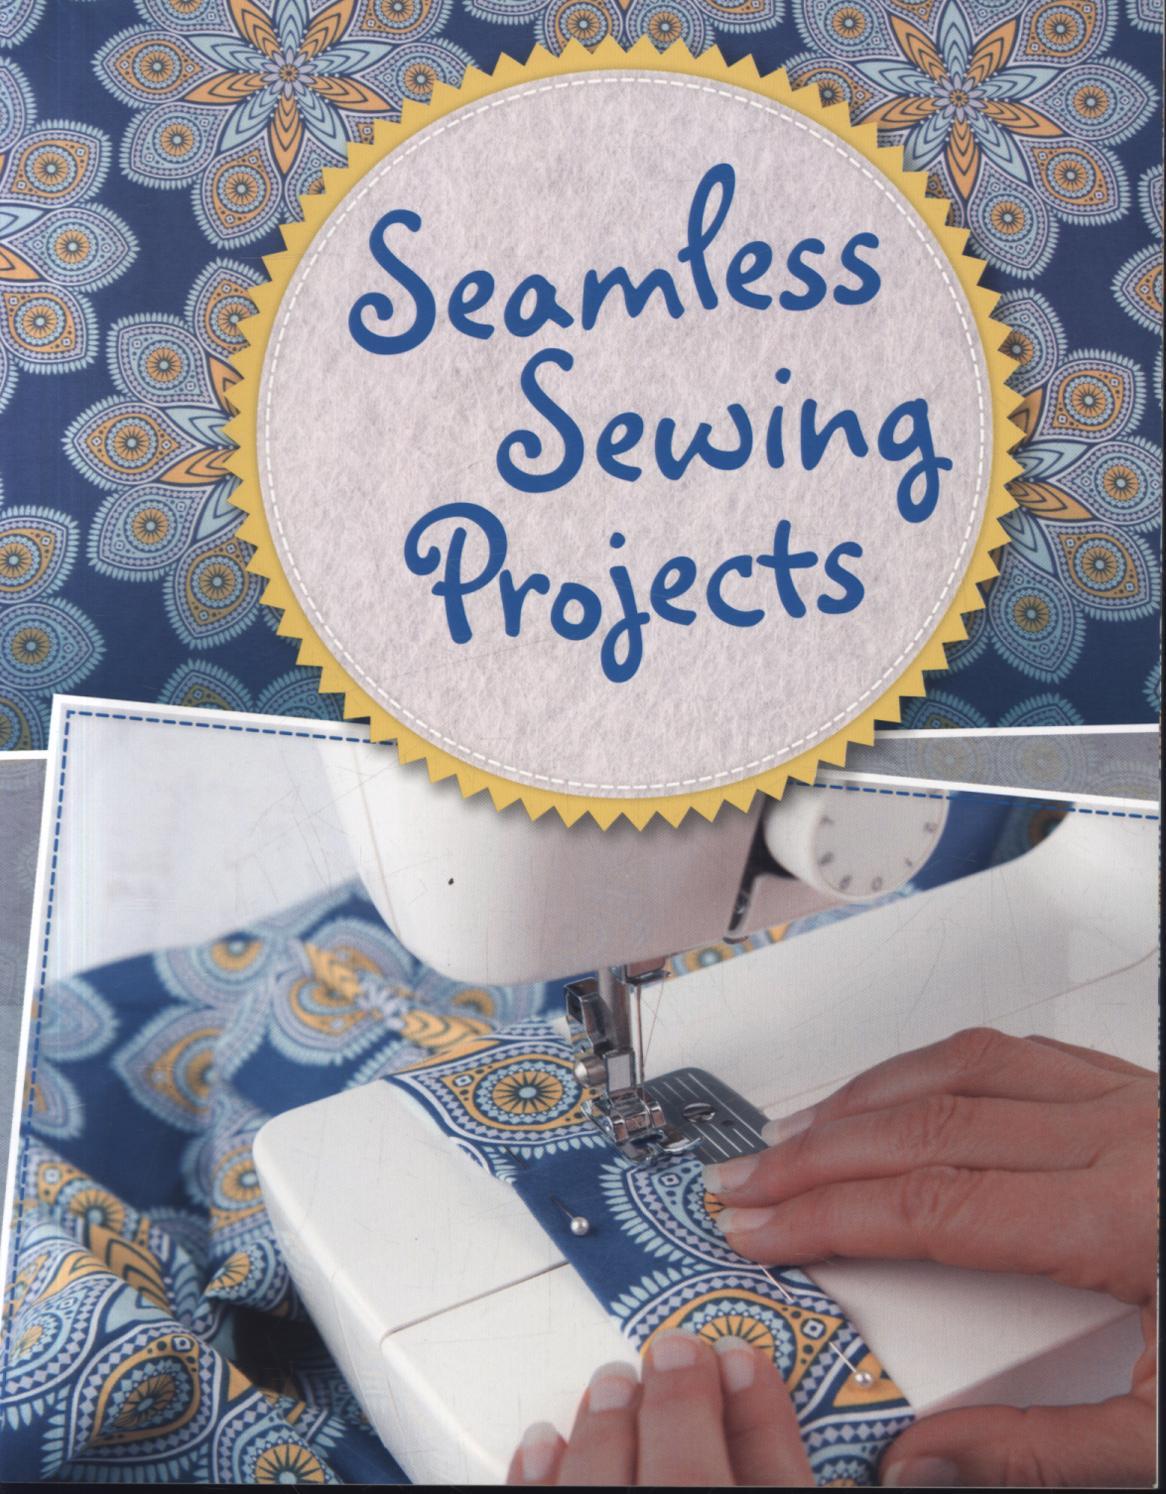 Seamless Sewing Projects